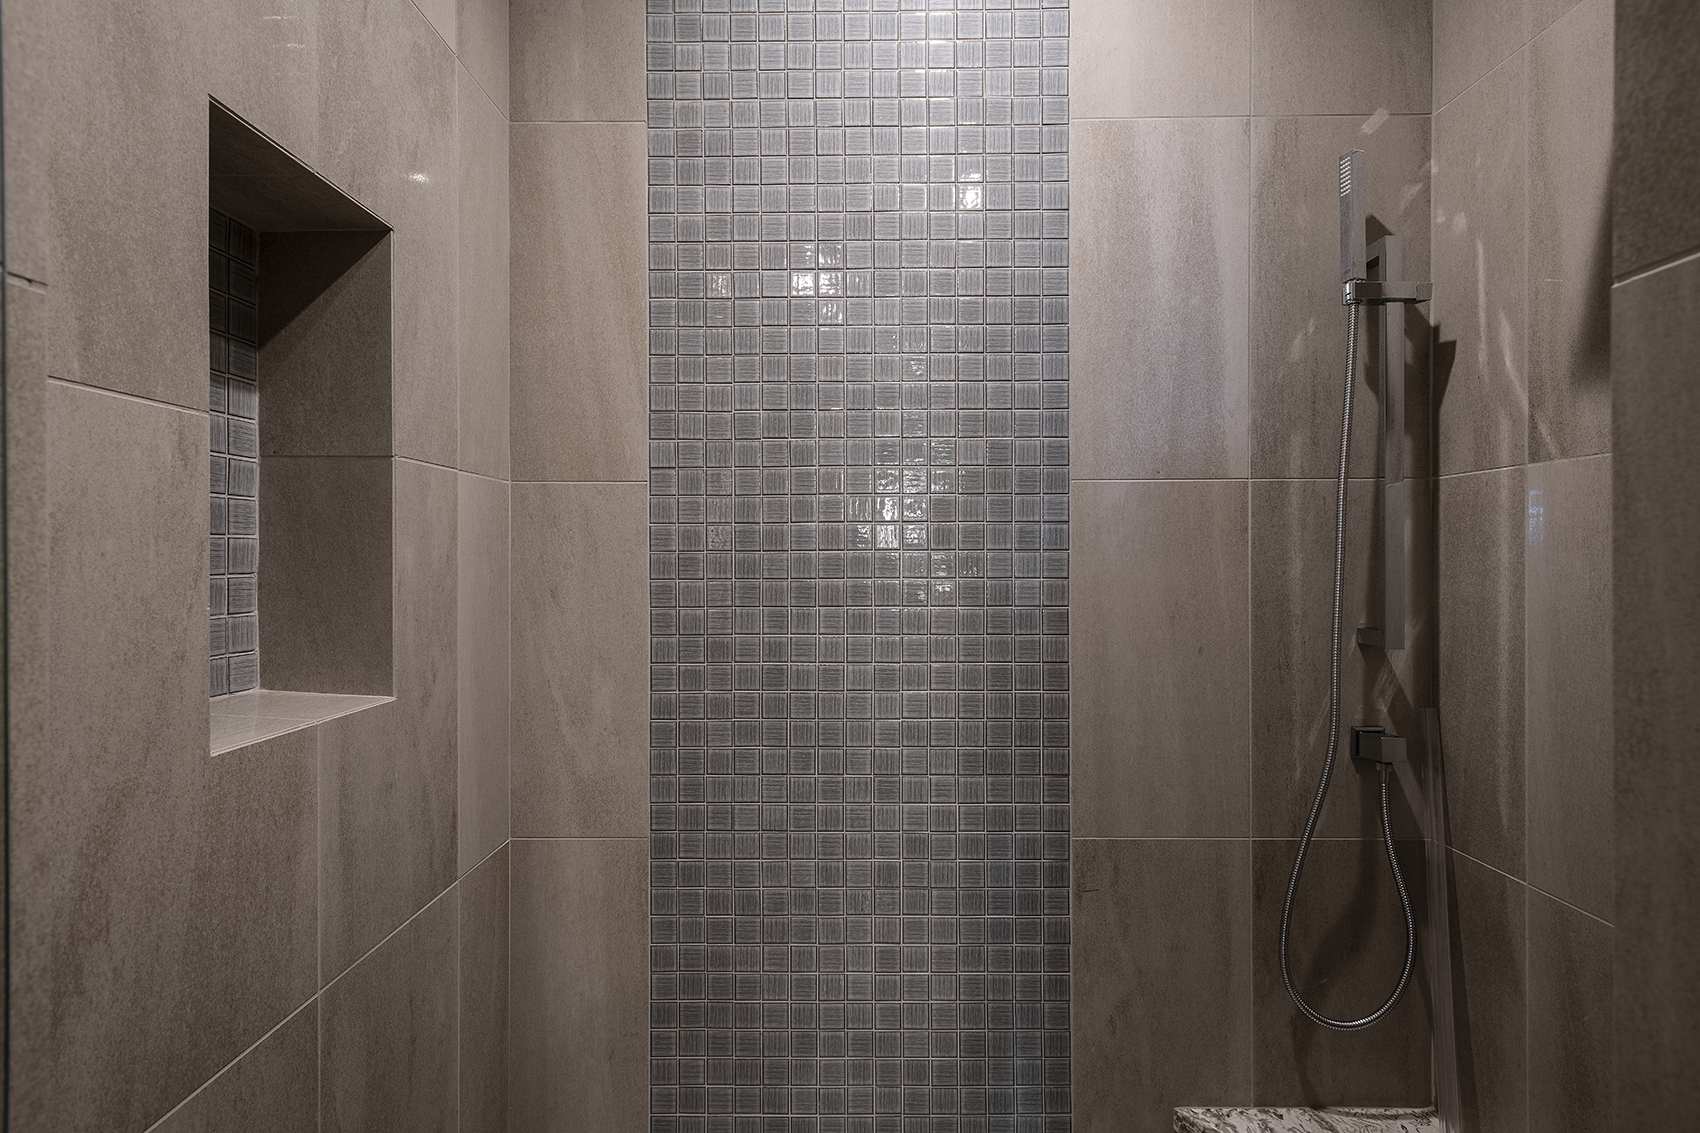 Luxury Shower Tile Designs: Elevate with High-End Tiles